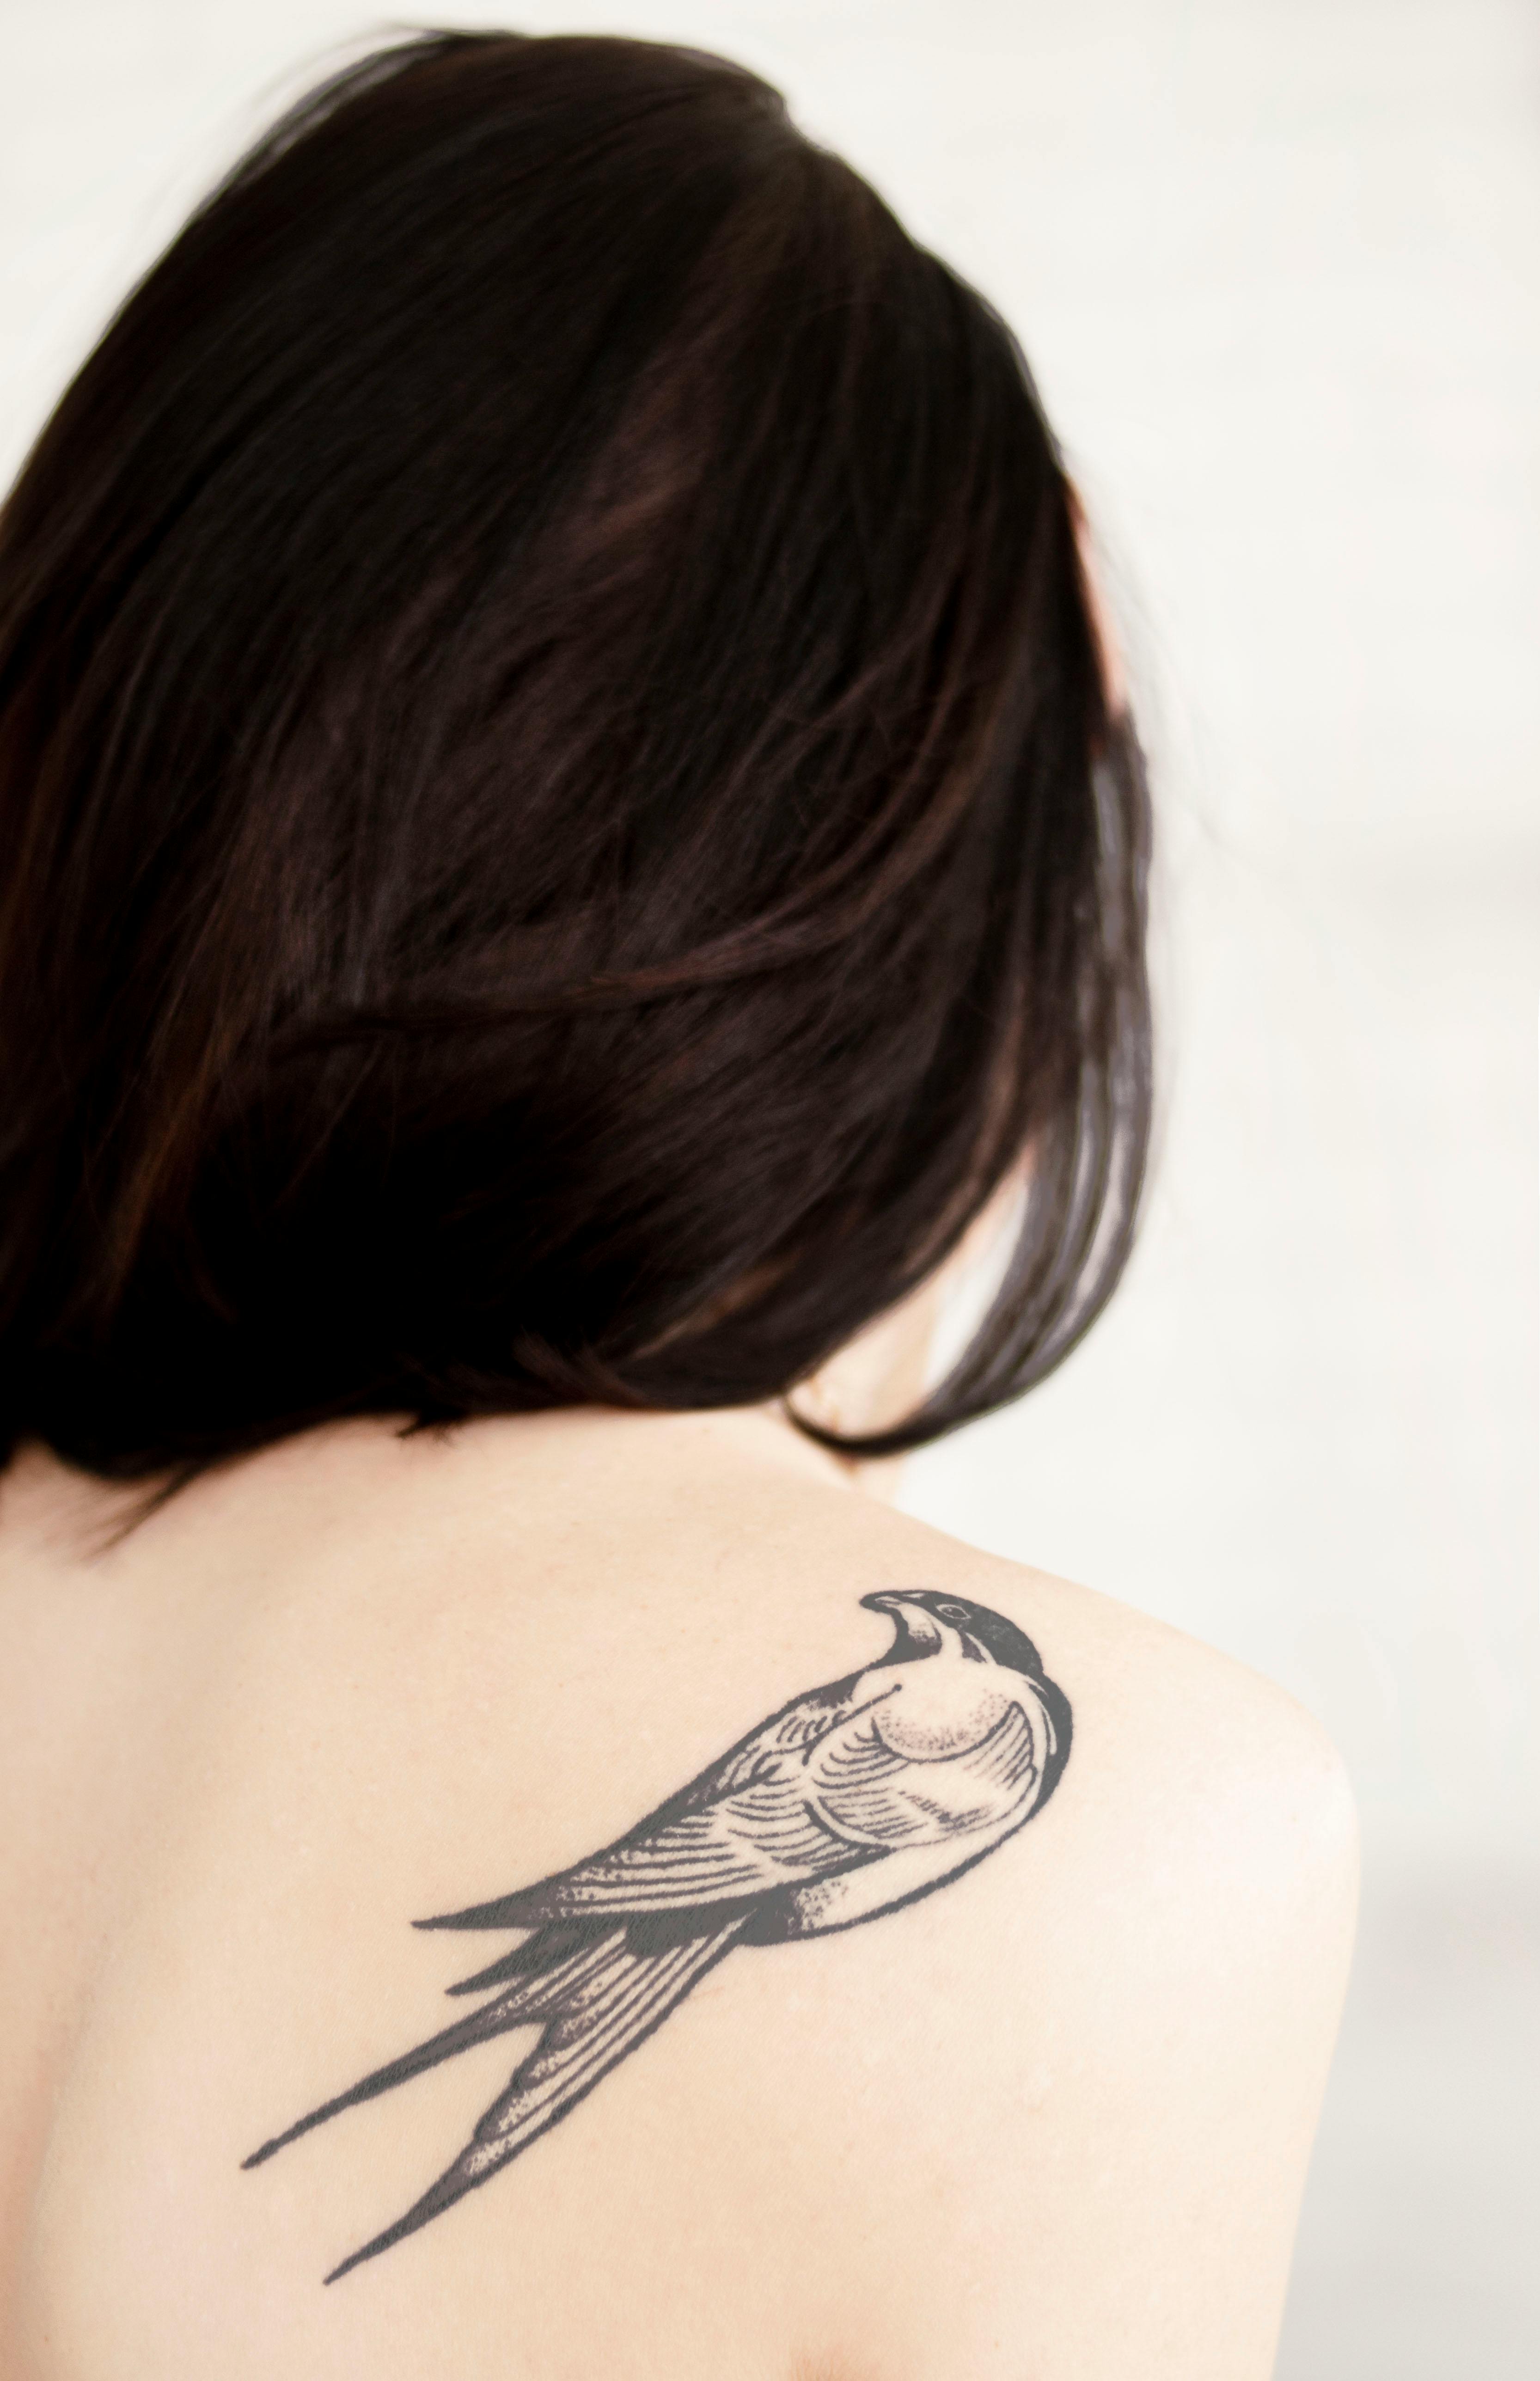 Tattoo Design Stock Photos and Images - 123RF